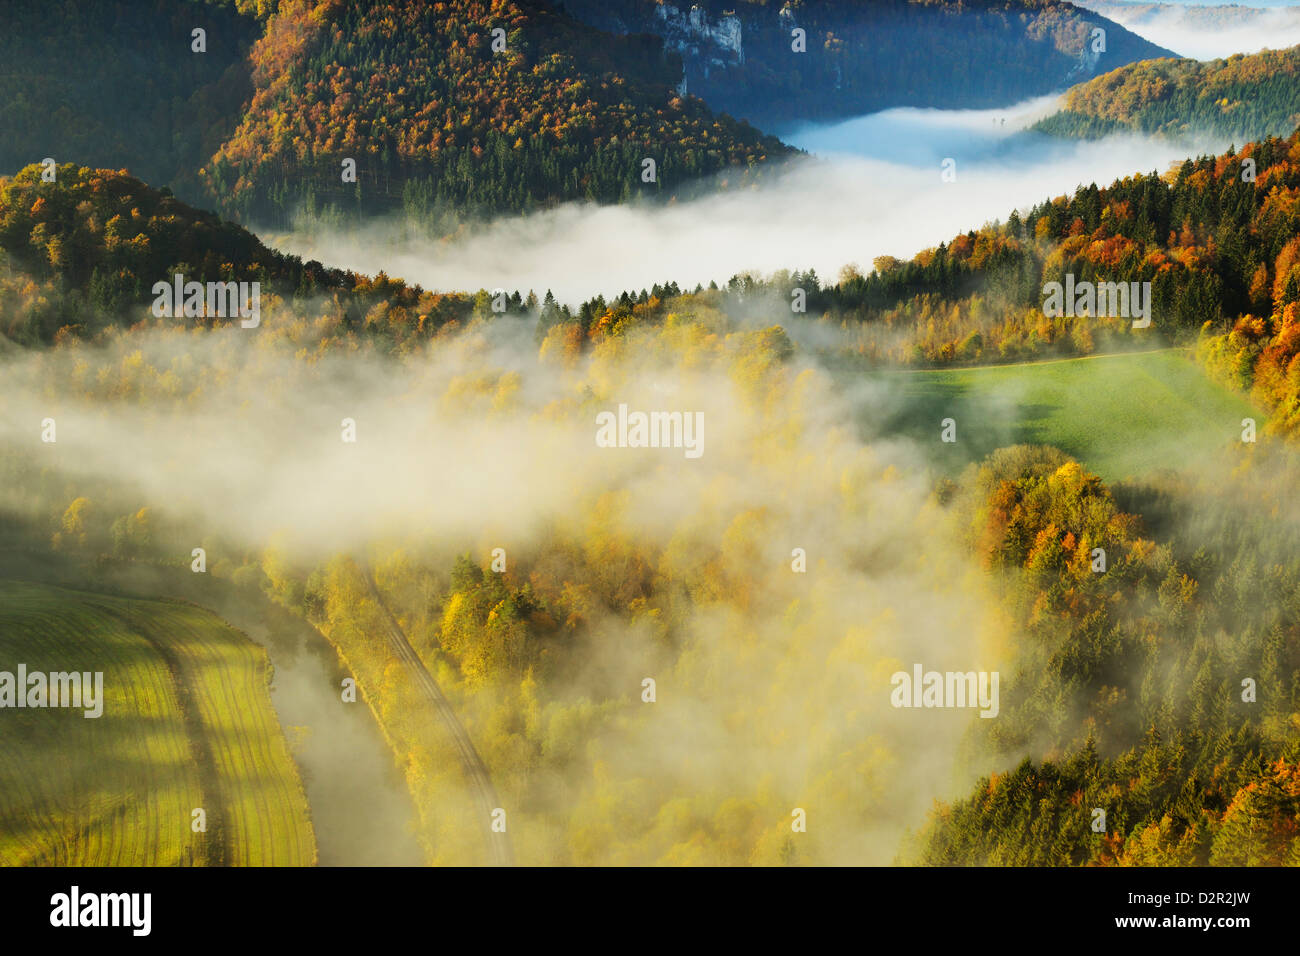 View from Eichfelsen of the Donautal (Danube Valley), near Beuron, Baden-Wurttemberg, Germany, Europe Stock Photo